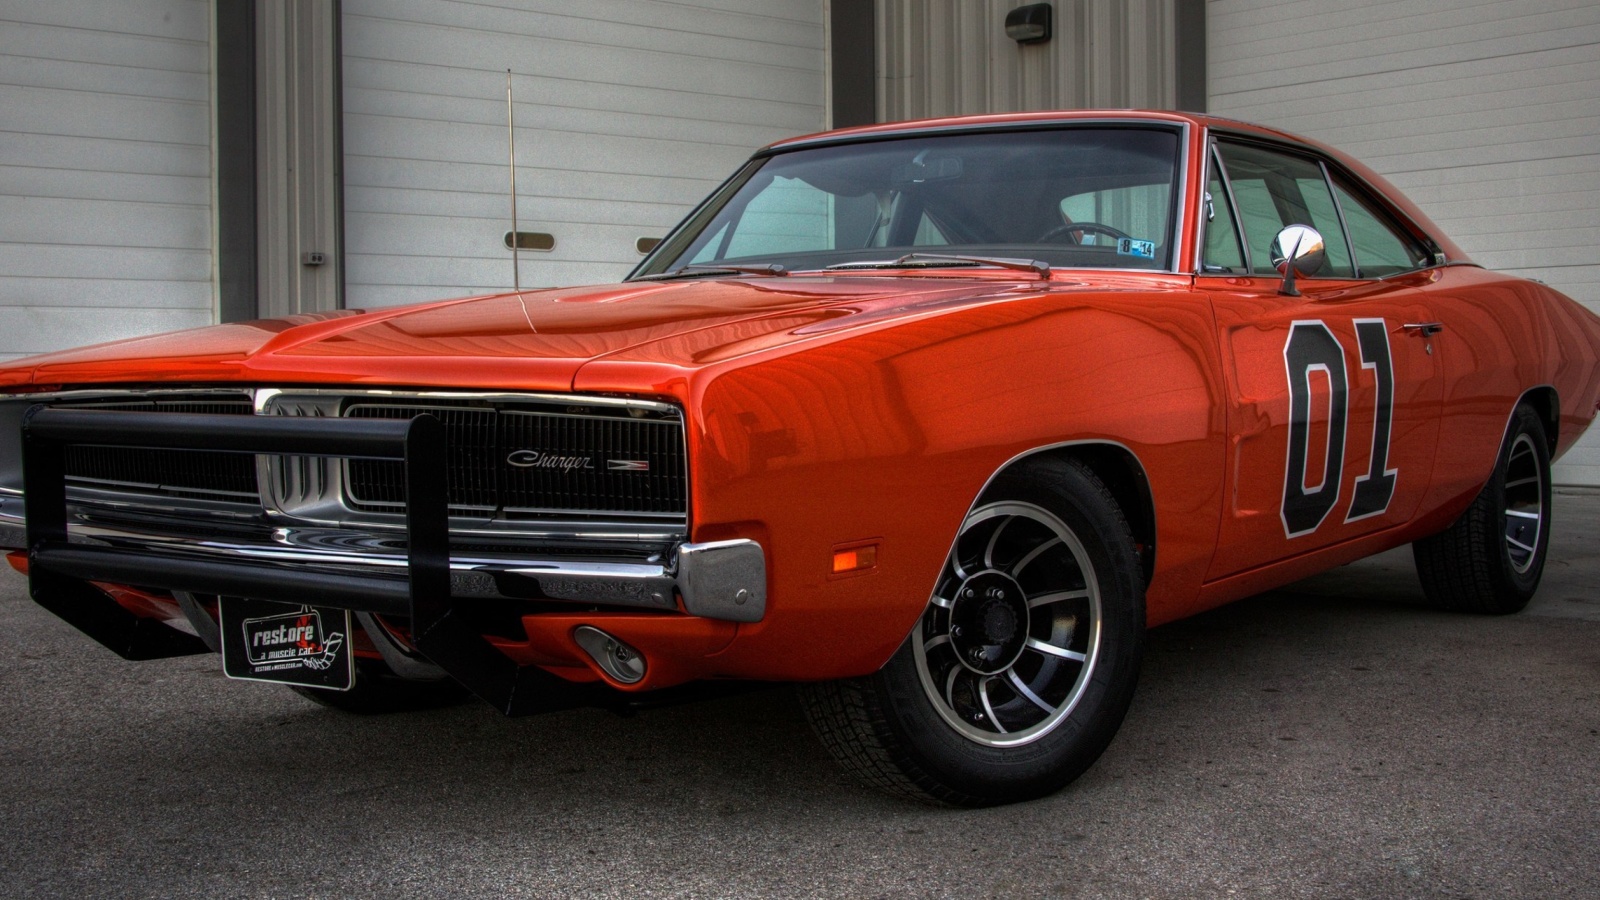 1969 Dodge Charger wallpaper 1600x900